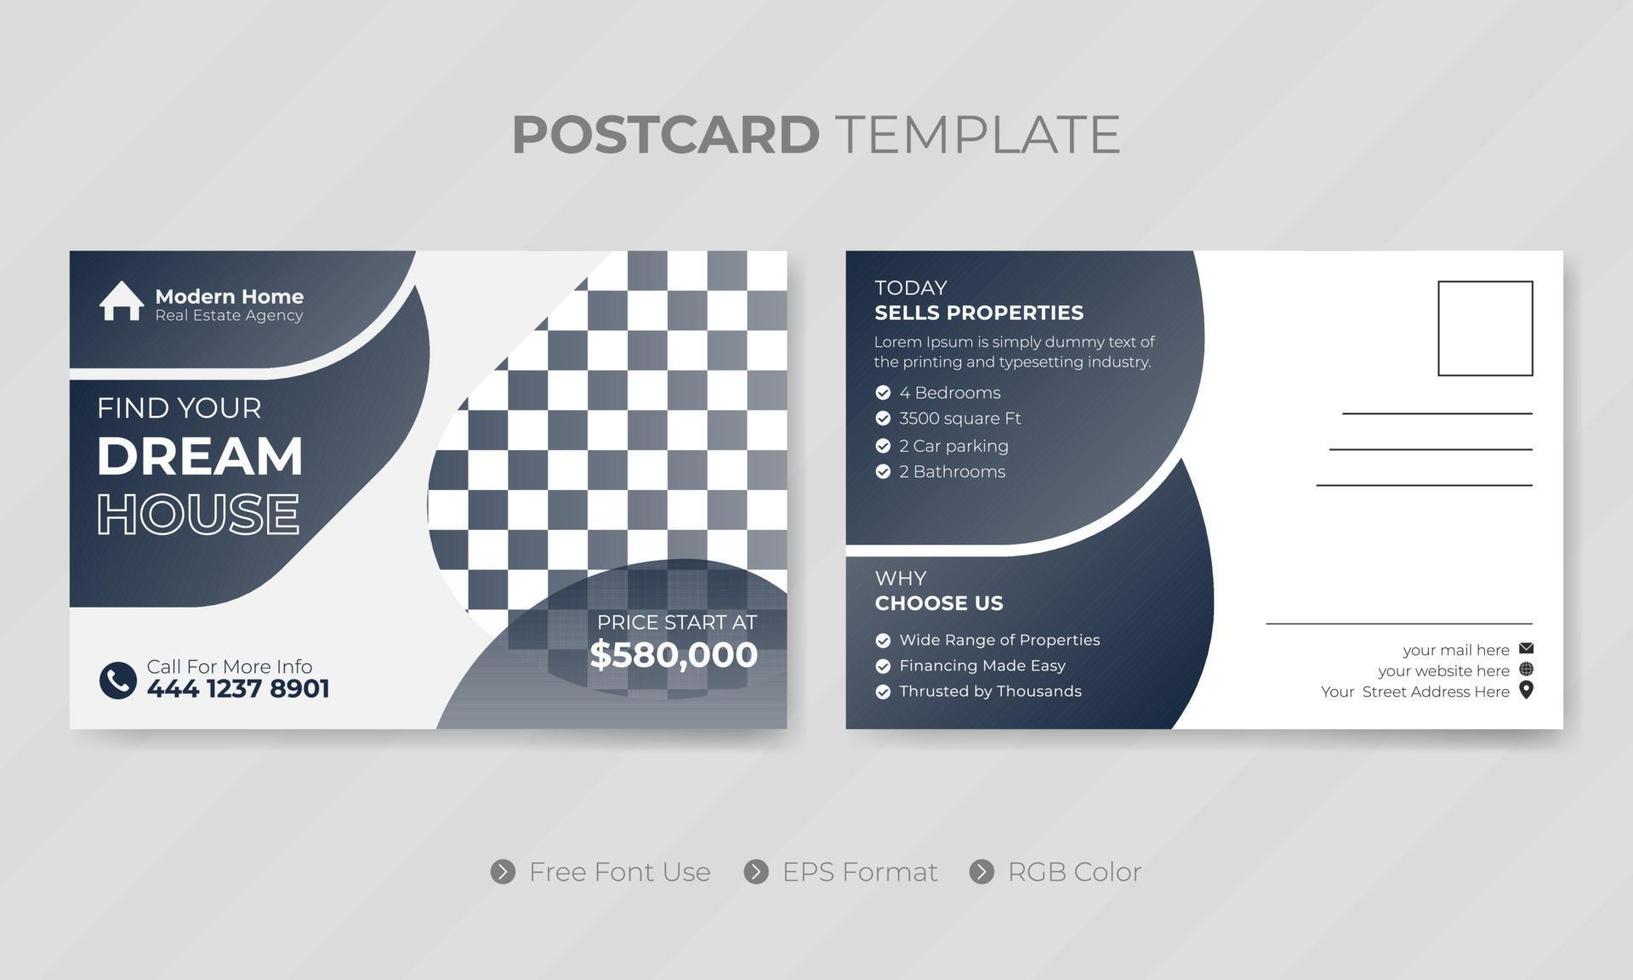 Professional digital company real estate postcard template or social media design for business agency vector